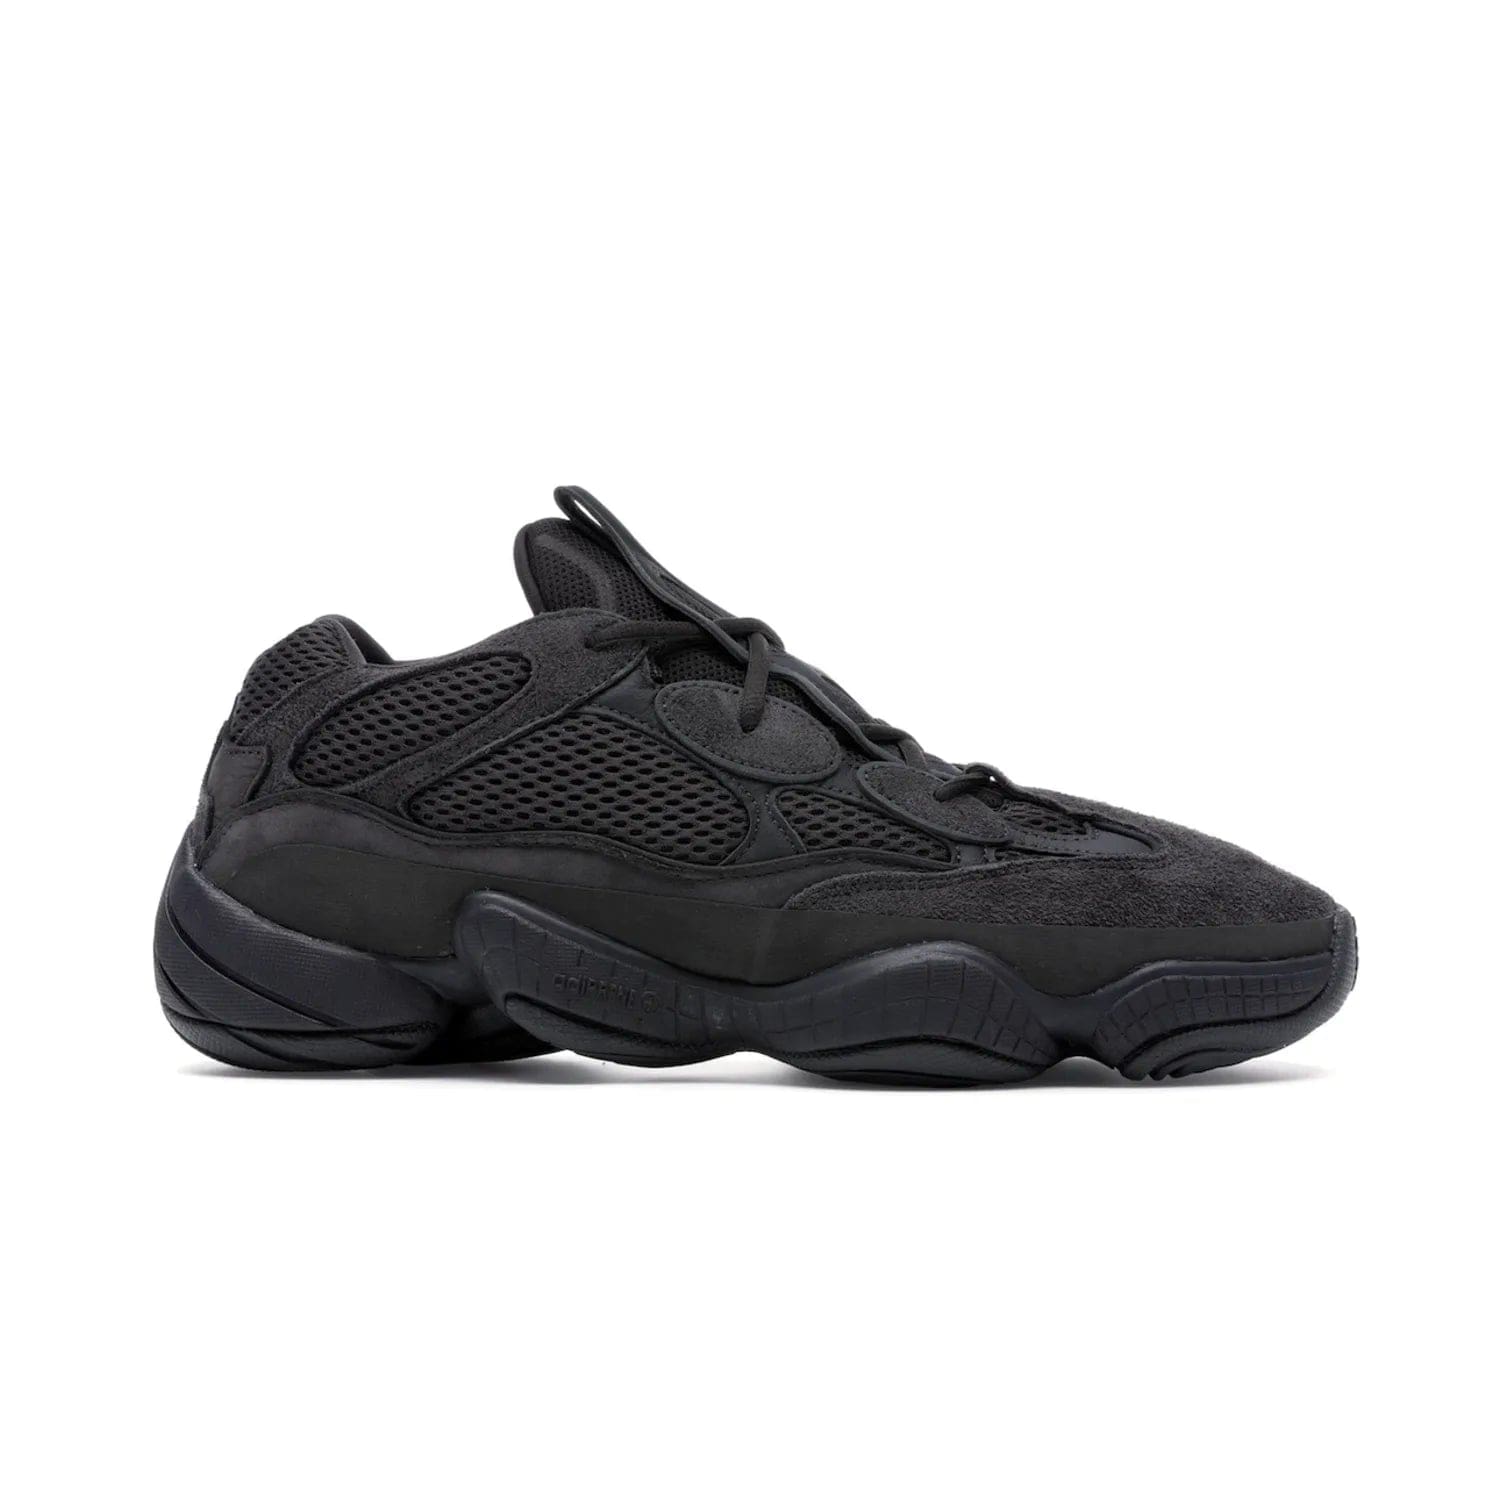 adidas Yeezy 500 Utility Black - Image 2 - Only at www.BallersClubKickz.com - Iconic adidas Yeezy 500 Utility Black in All-Black colorway. Durable black mesh and suede upper with adiPRENE® sole delivers comfort and support. Be unstoppable with the Yeezy 500 Utility Black. Released July 2018.